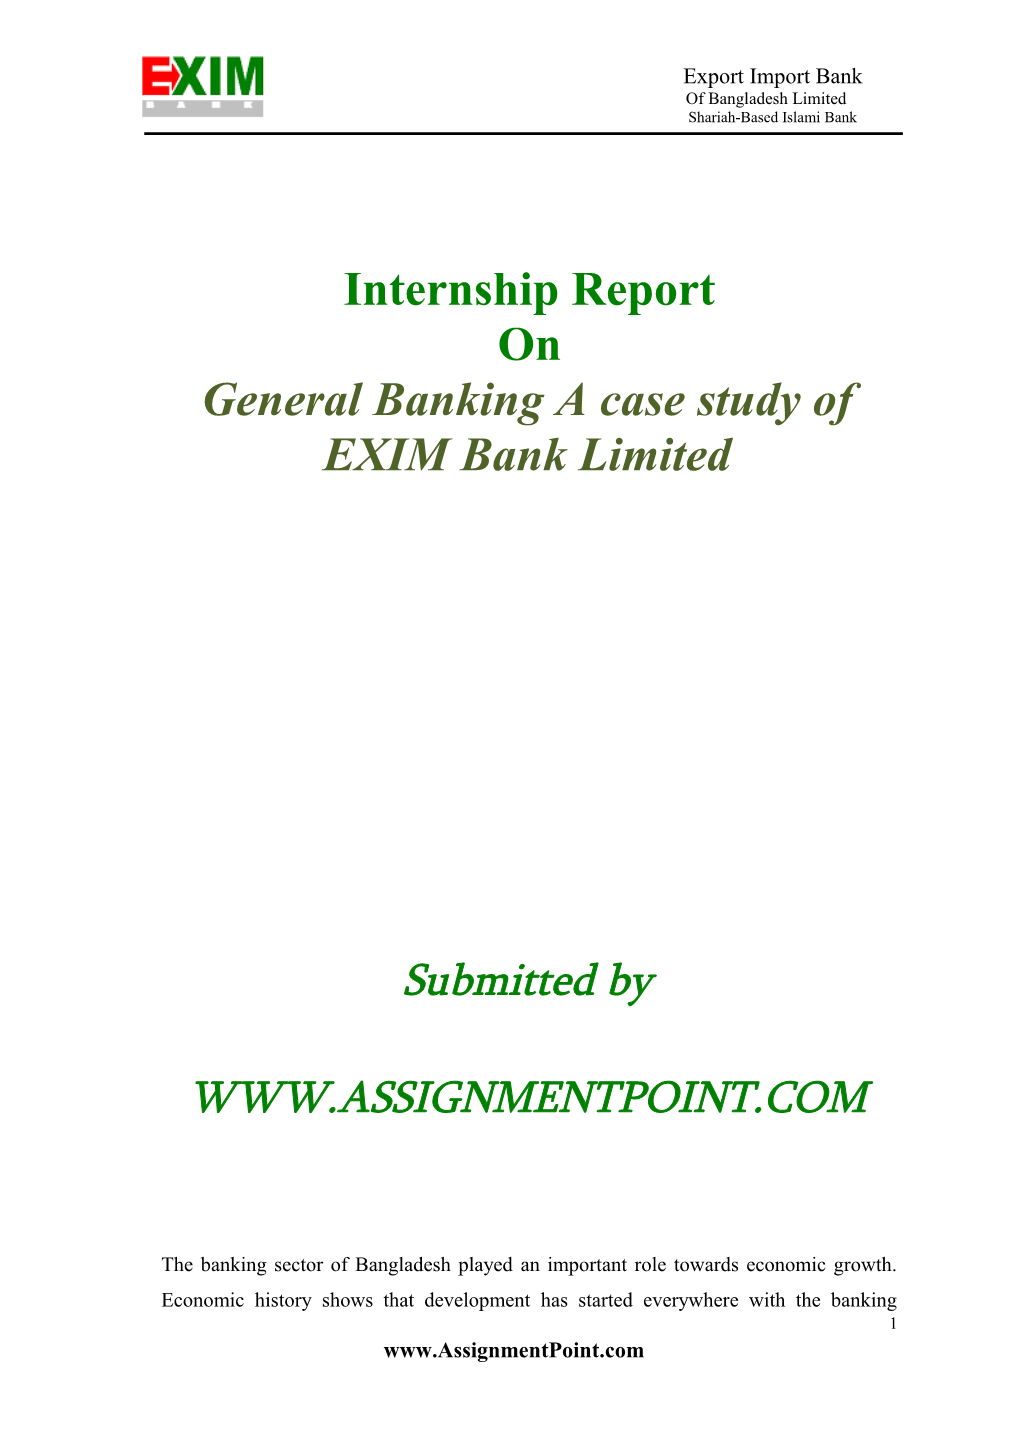 General Banking a Case Study of EXIM Bank Limited